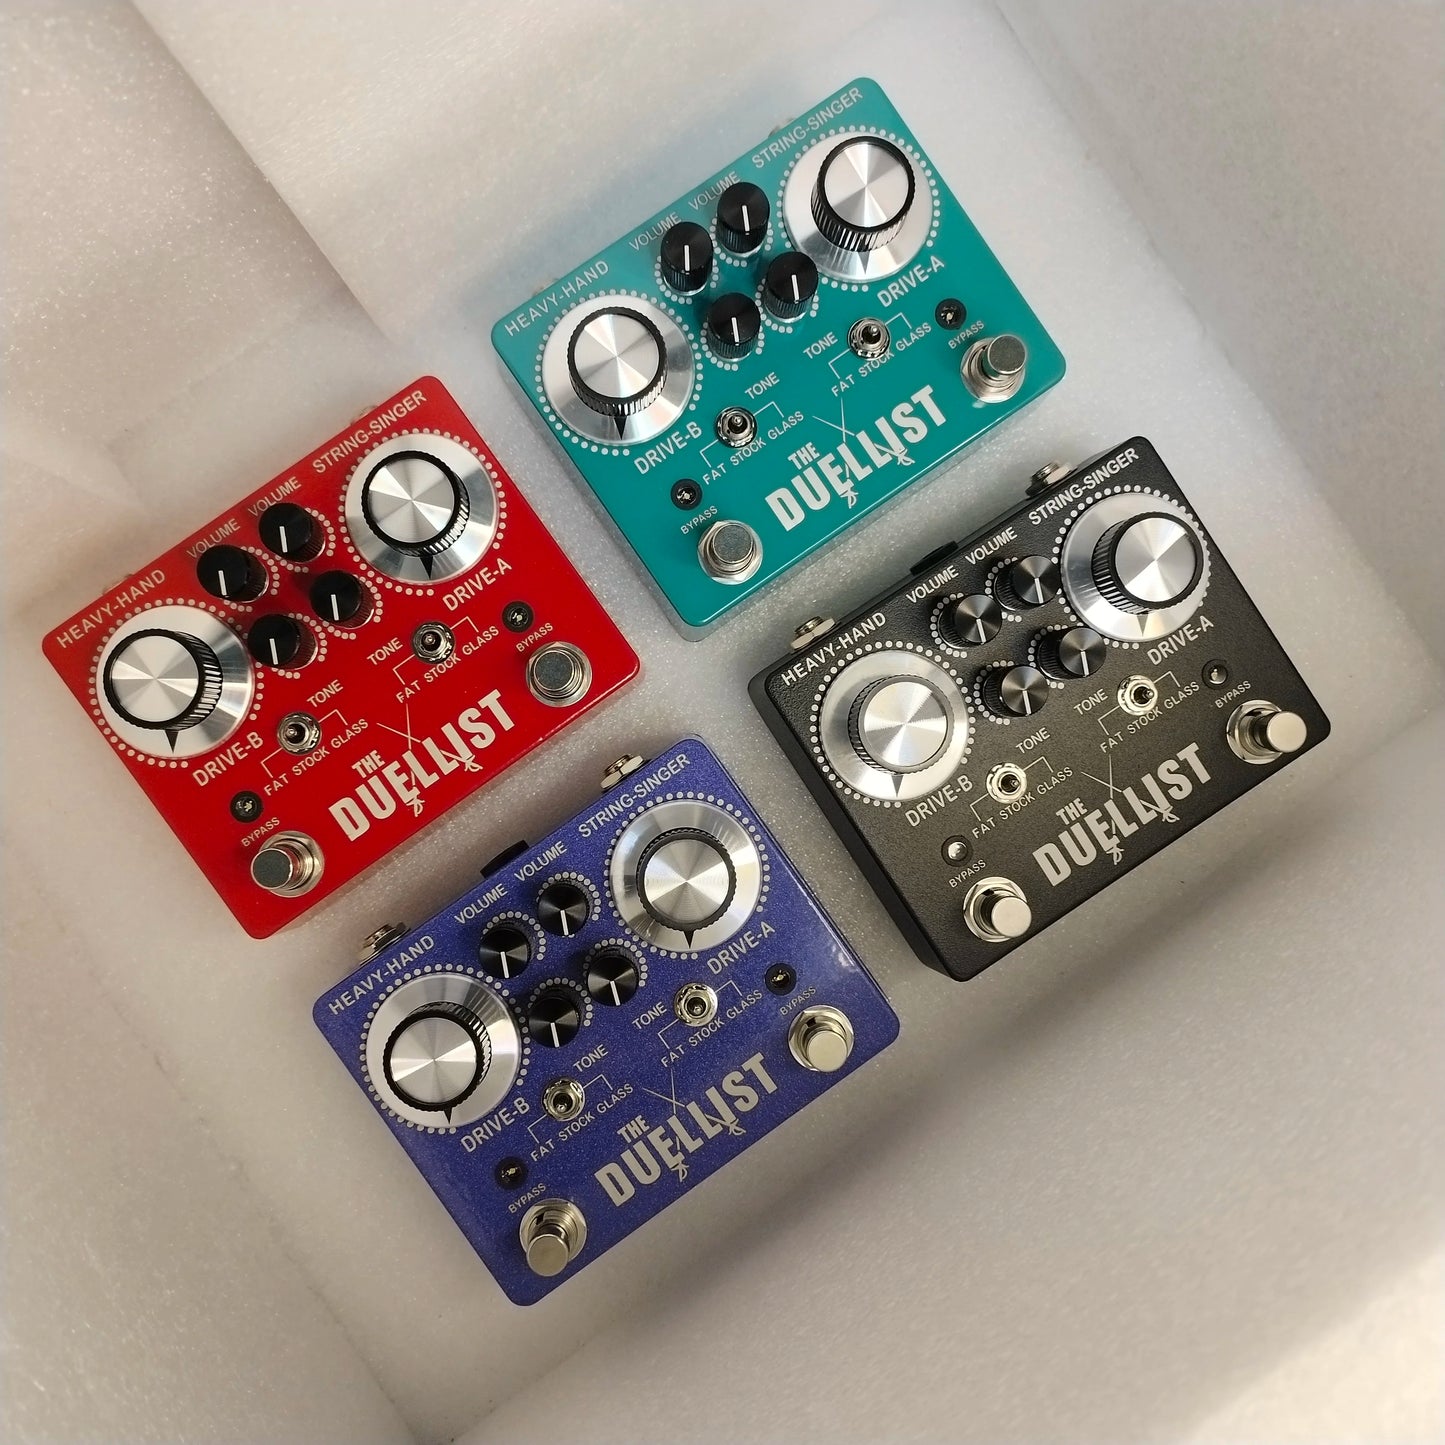 Handmade Overdrive Distortion Pedal - True Bypass, Multiple Options Available